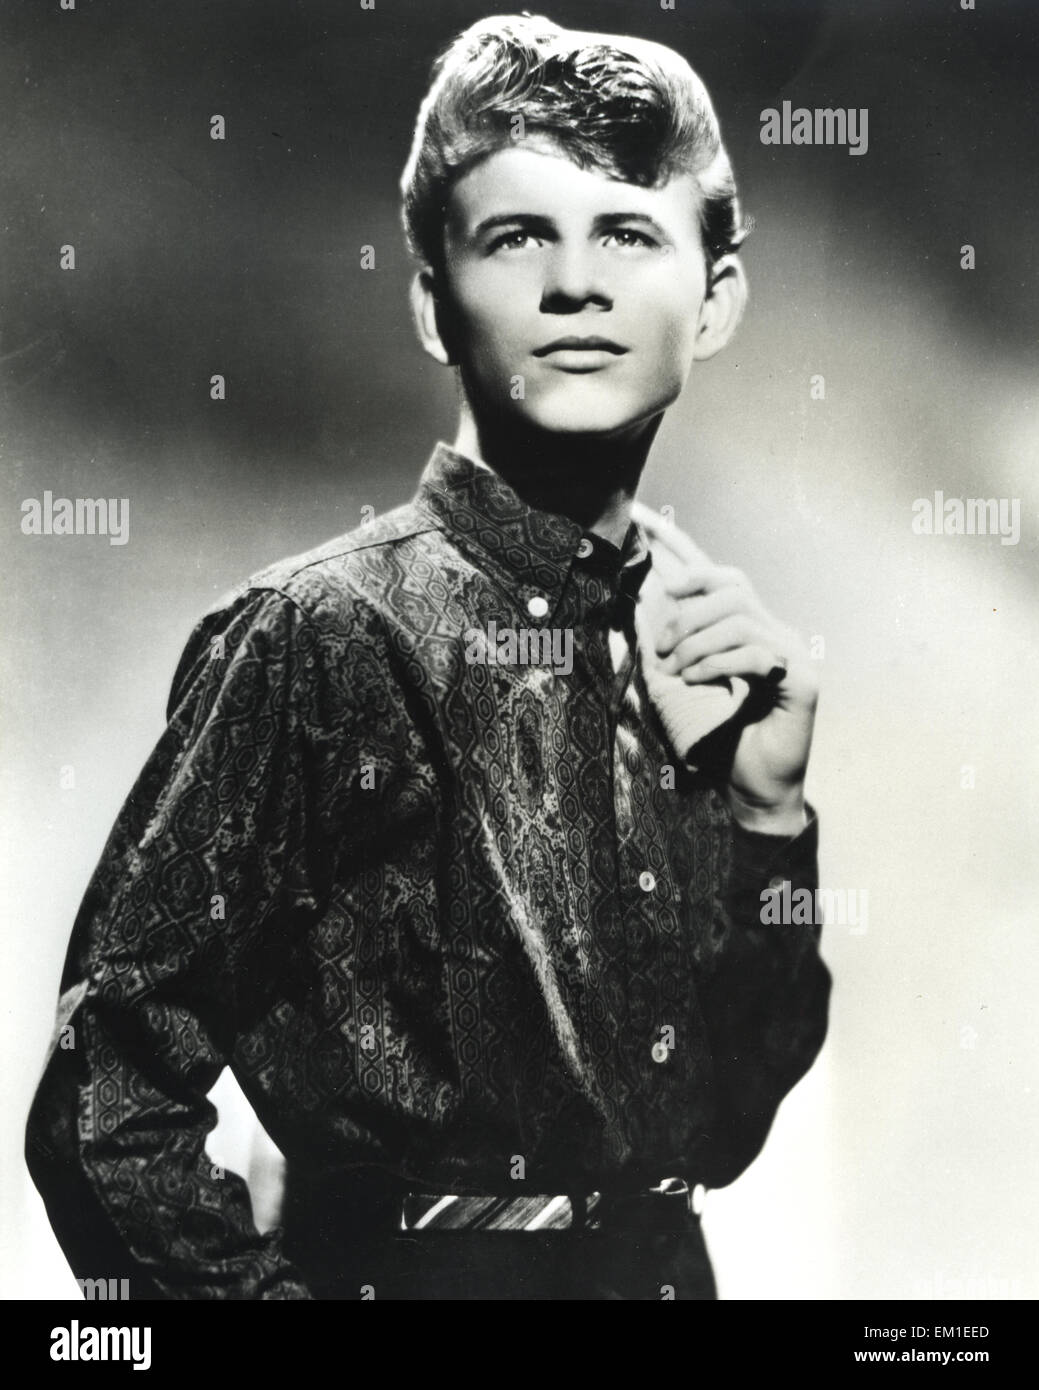 BOBBY RYDELL US singer about 1965 Stock Photo